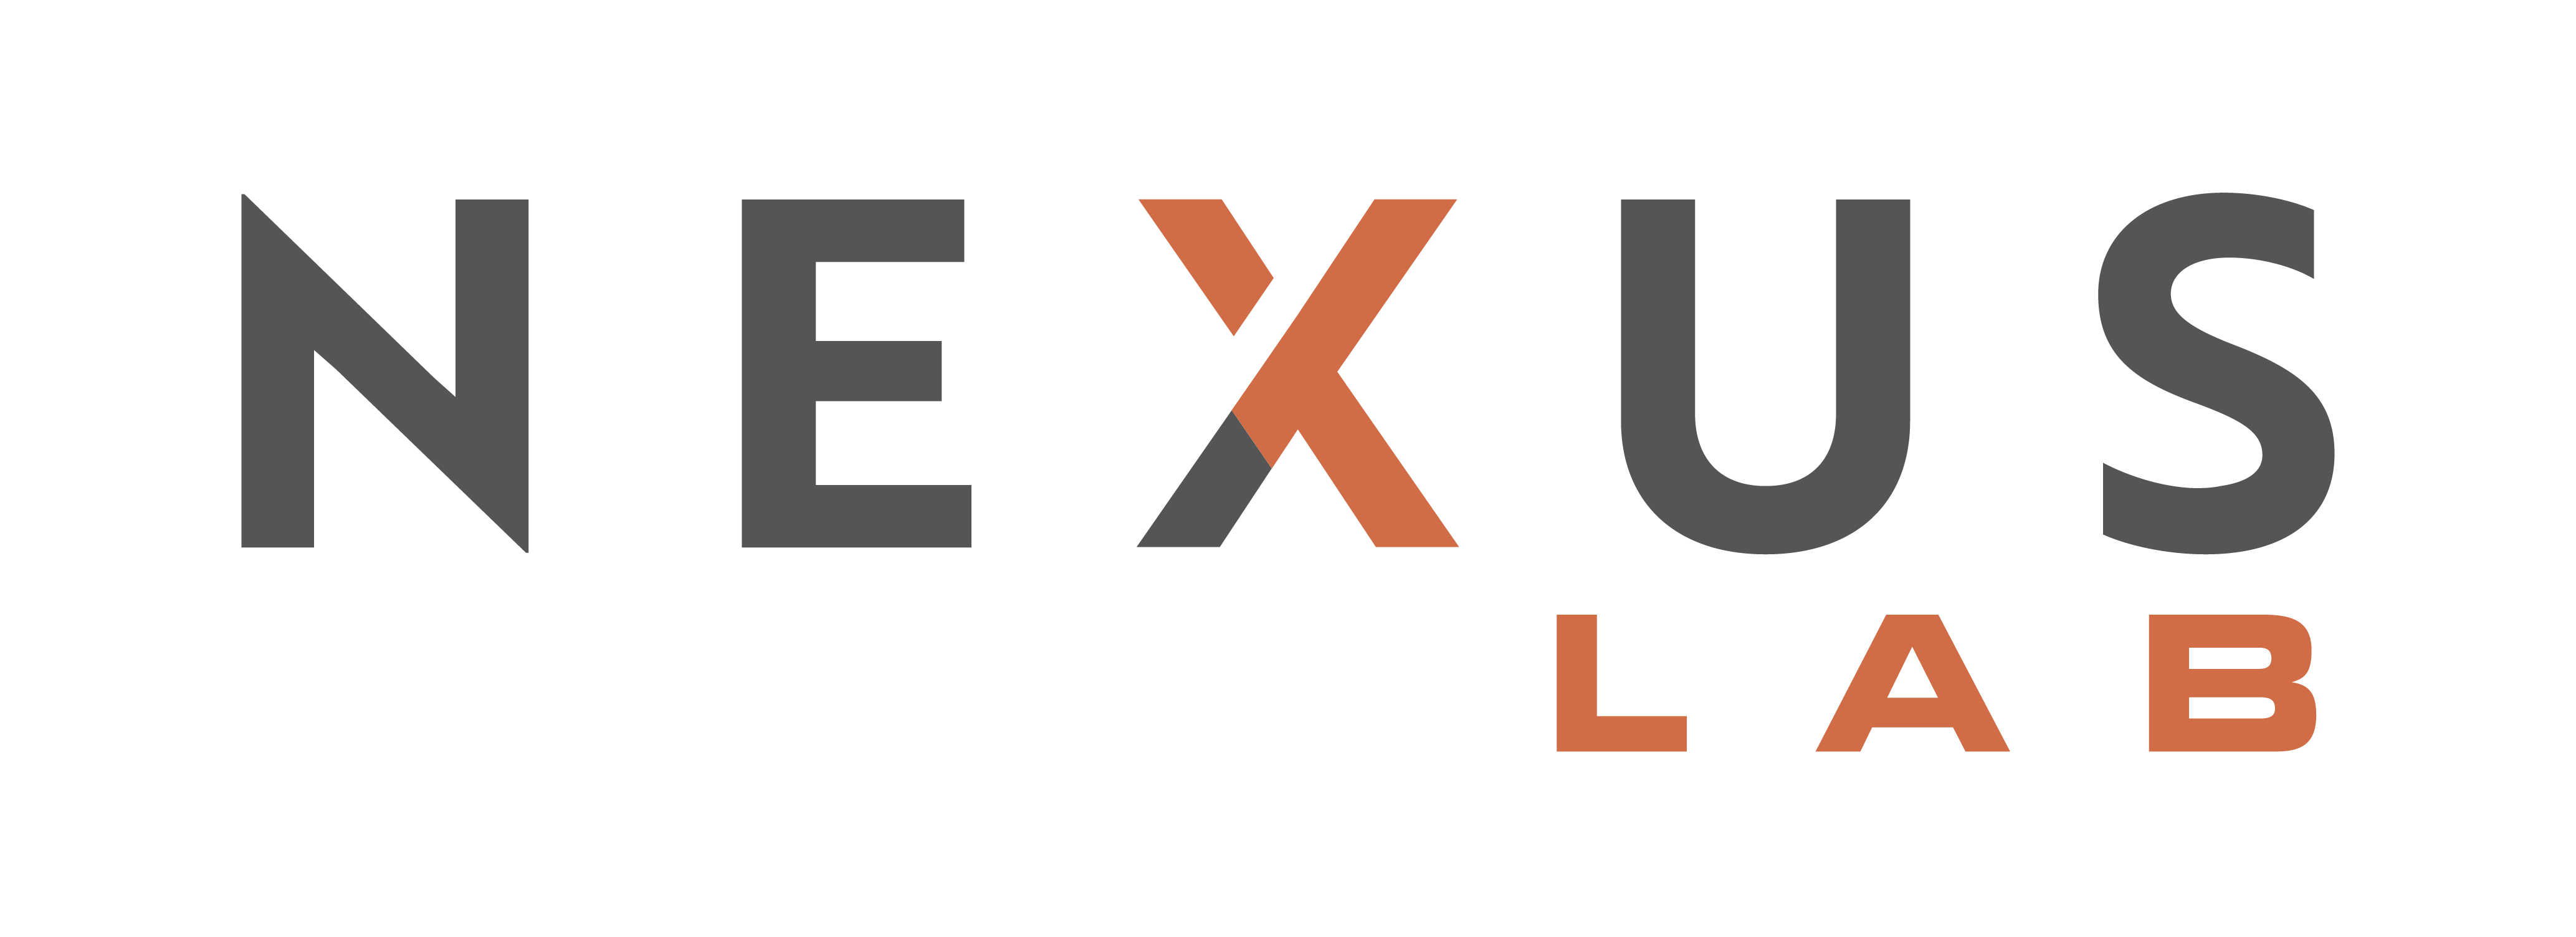 A service offered by Nexus Lab